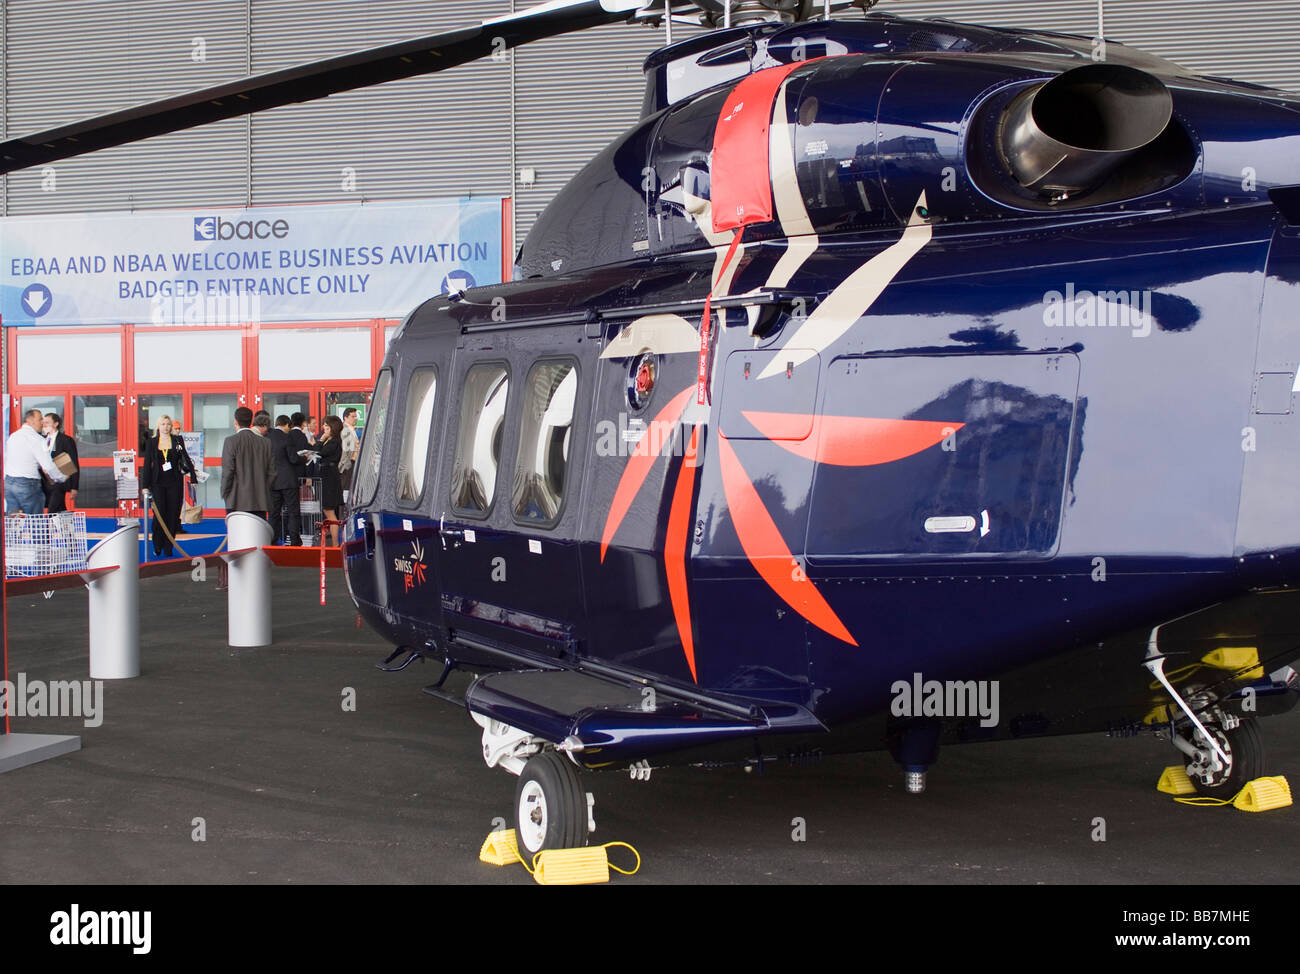 Agusta AB-139 Helicopter HB-ZUU on Display at EBACE Trade Show at Geneva Airport Geneve Suisse Stock Photo